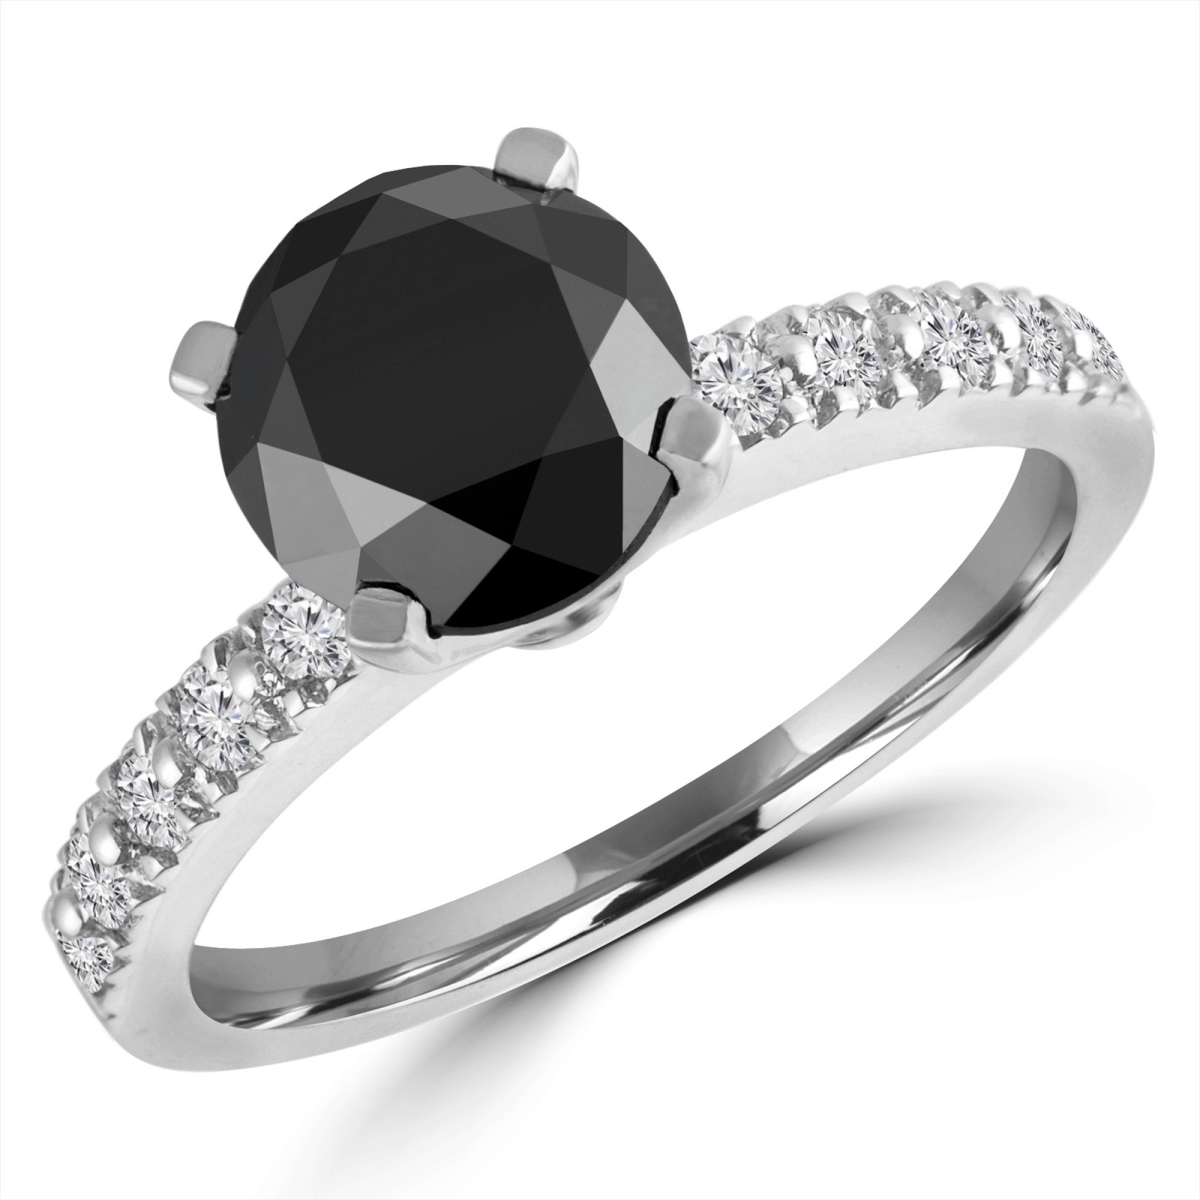 Picture of Majesty Diamonds MD180268-P 2.62 CTW Round Black Diamond Solitaire with Accents Engagement Ring in 14K White Gold